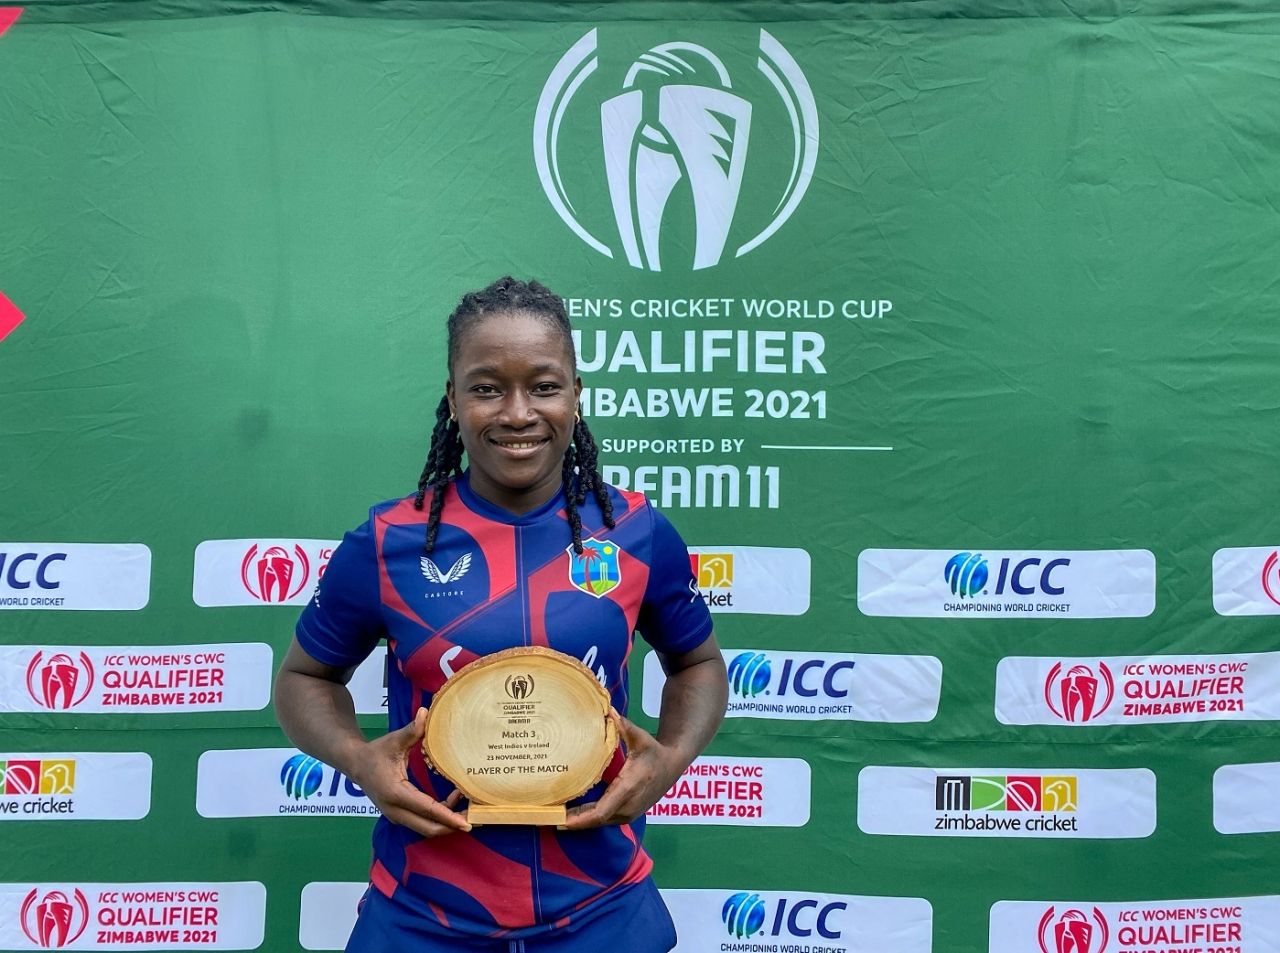 Deandra Dottin was named Player of the Match for her 73, West Indies vs Ireland, Women's World Cup Qualifier, Harare, November 23, 2021